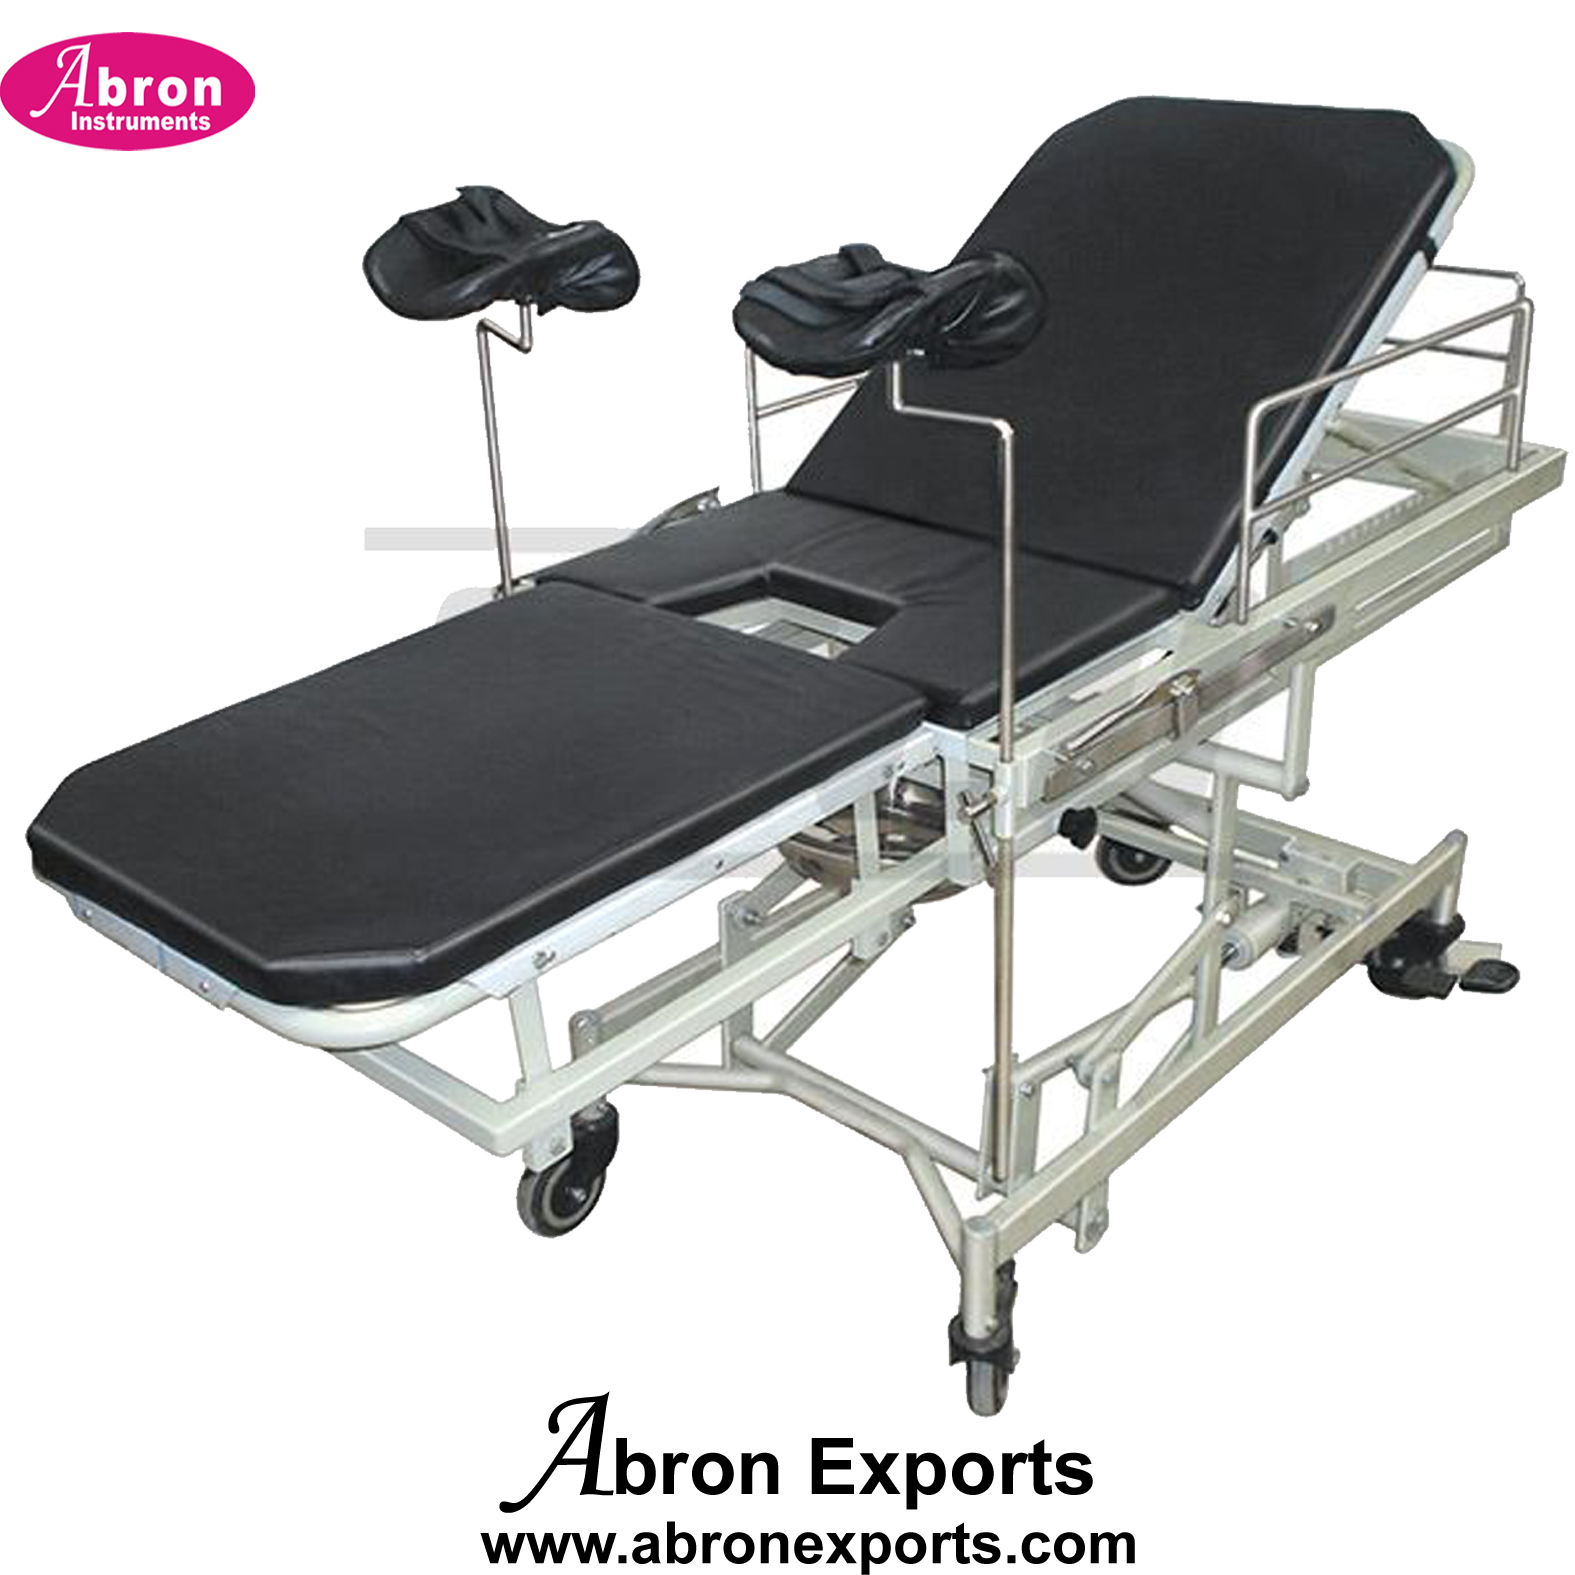 Gynecological Delivery Obstetric Labour Table Telescopic Adjustment Hight 72x24inch Delivery with legs wheels support Abron ABM-2714GTH 